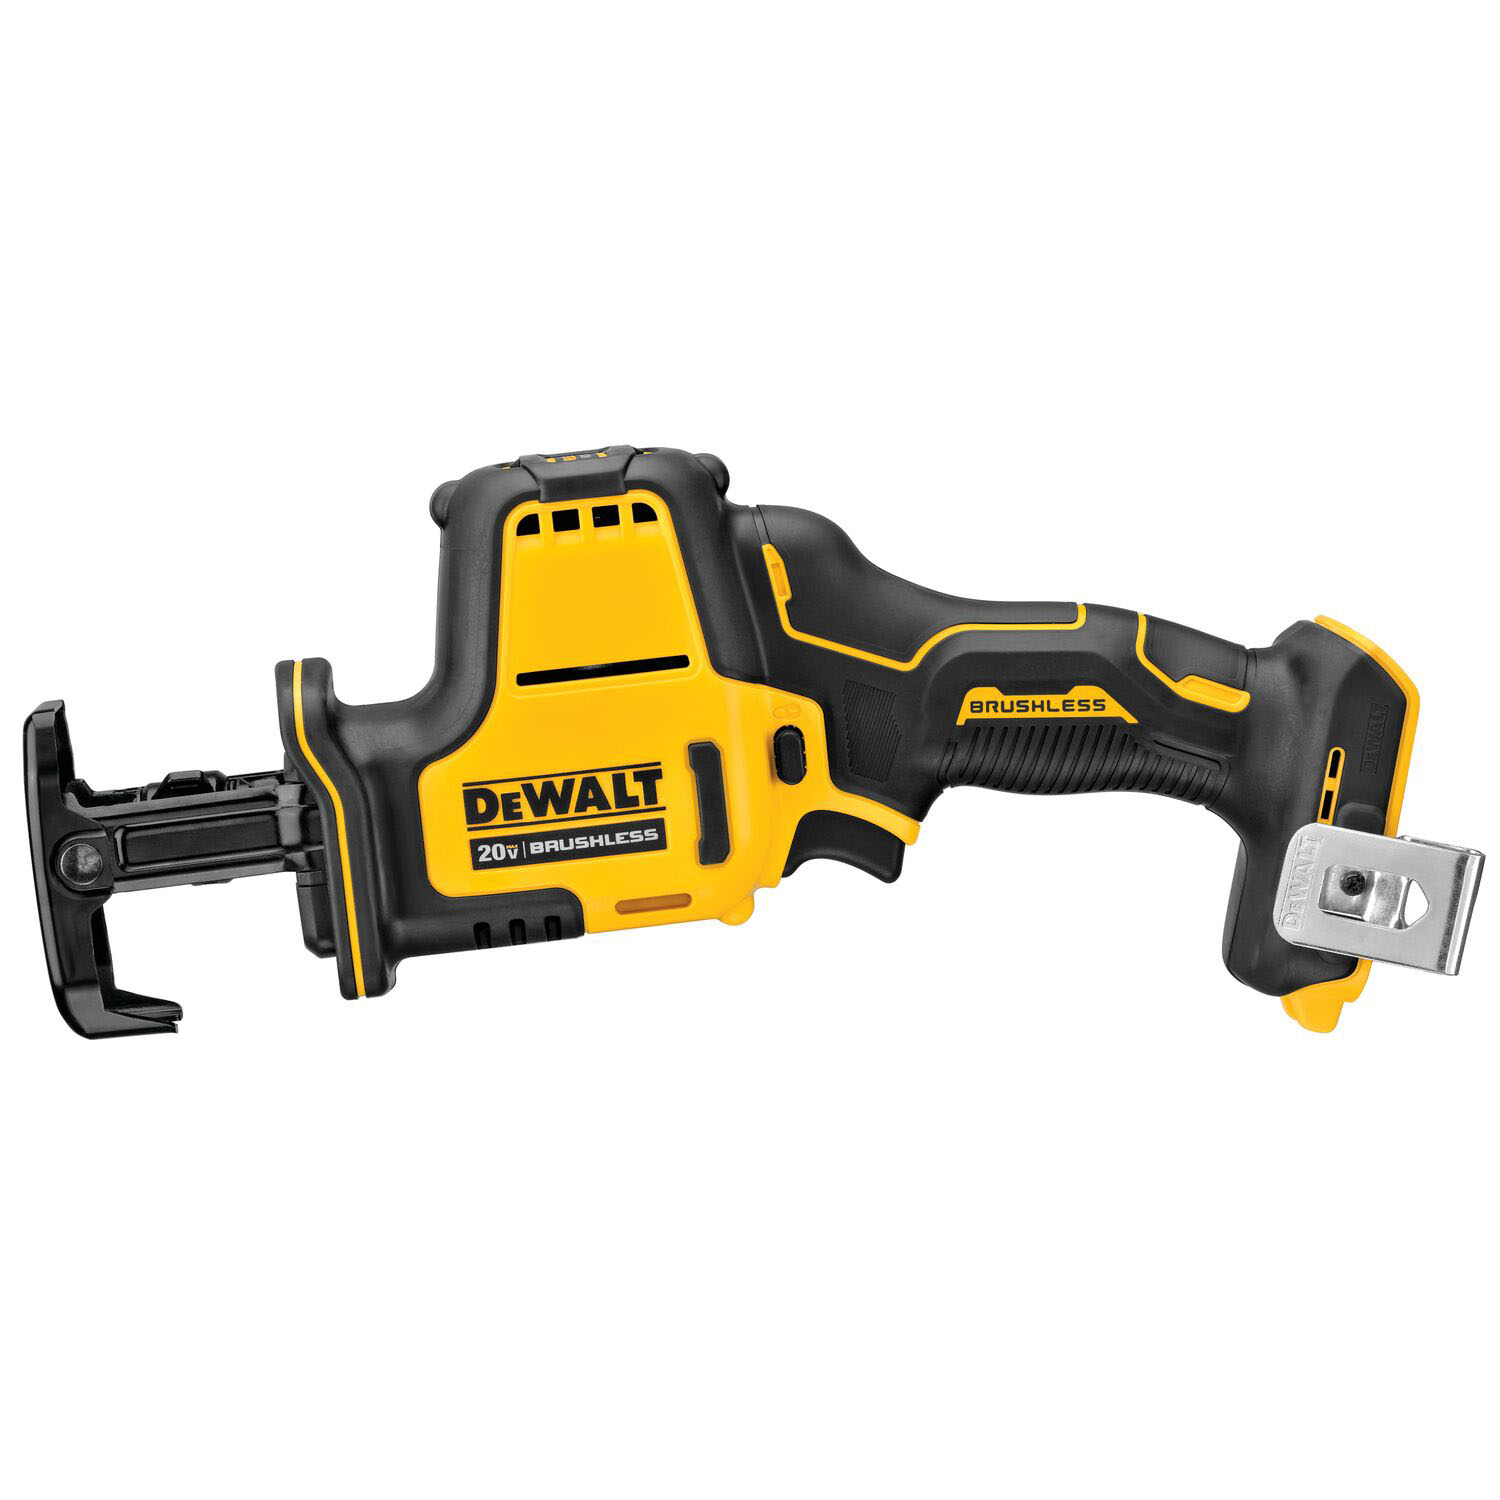 ATOMIC 20V MAX CORDLESS ONE-HANDED RECIPROCATING SAW (TOOL ONLY)